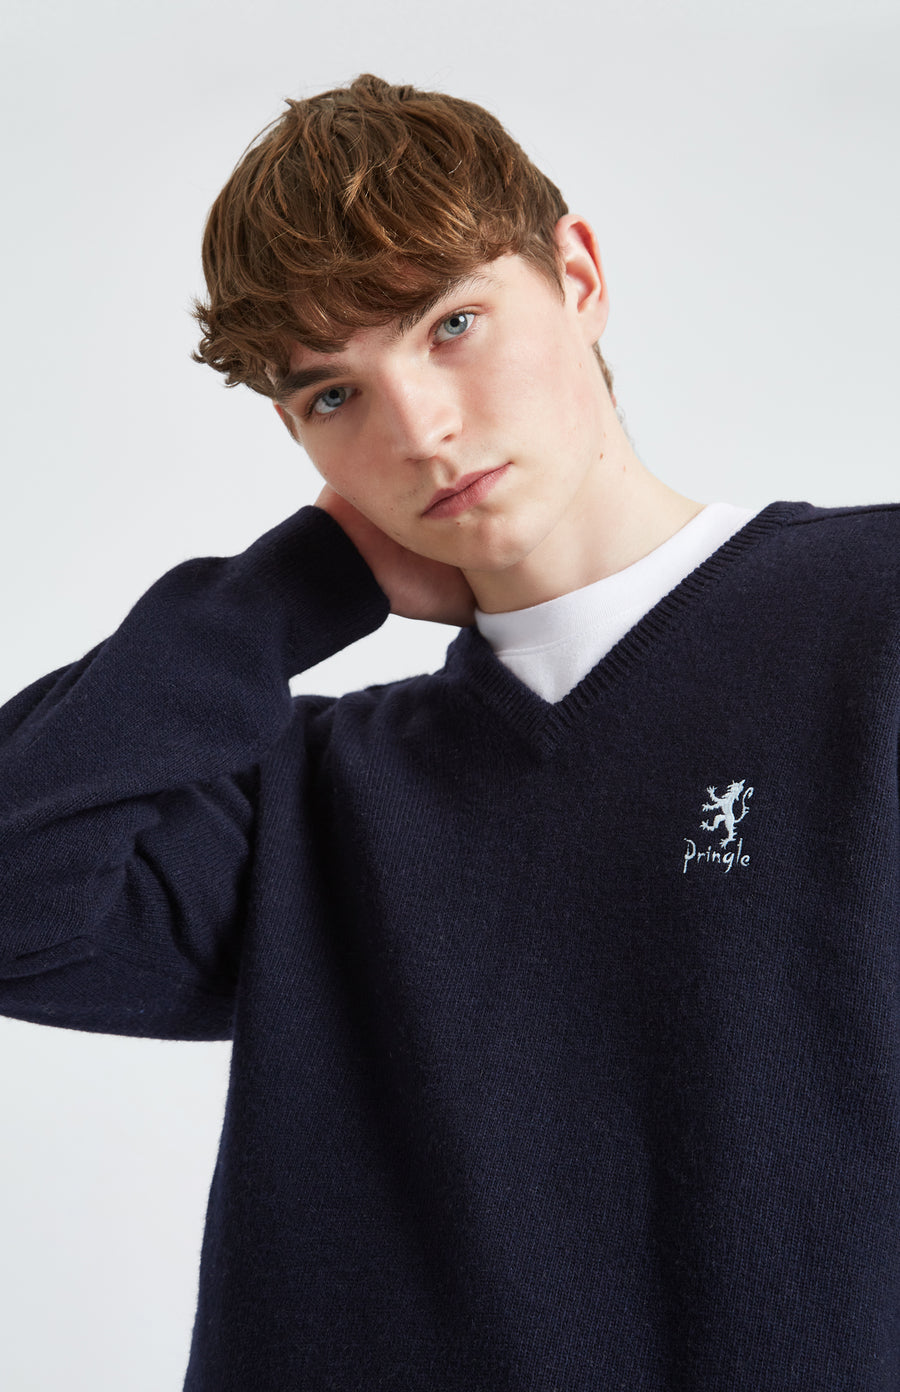 Pringle of Scotland Archive Men's V neck Lambswool Jumper In Navy showing embroidery